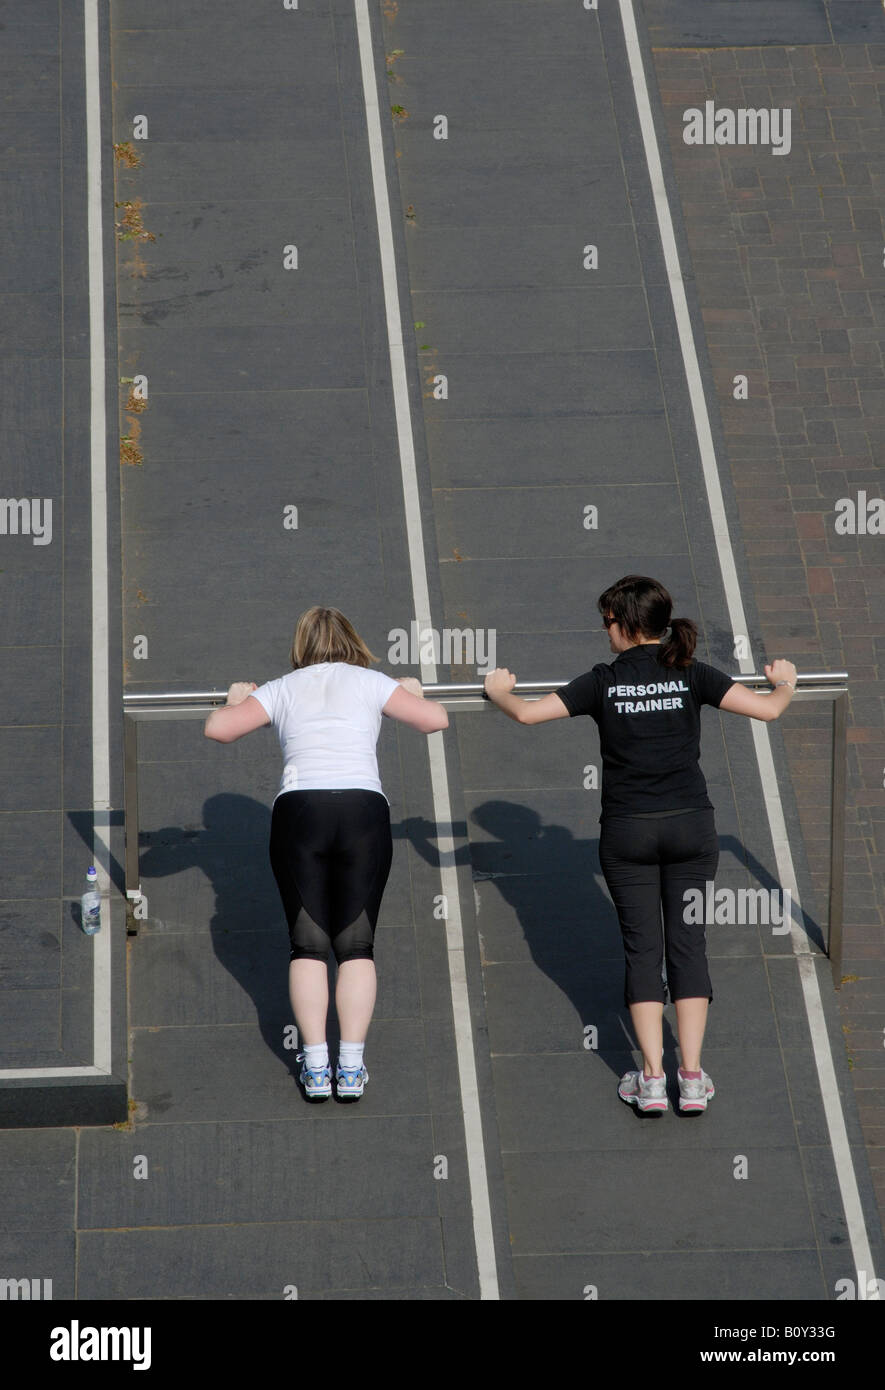 Personal trainer (indicated on the back of her t-shirt) and client doing push ups on raised bar, South Bank, London, England Stock Photo